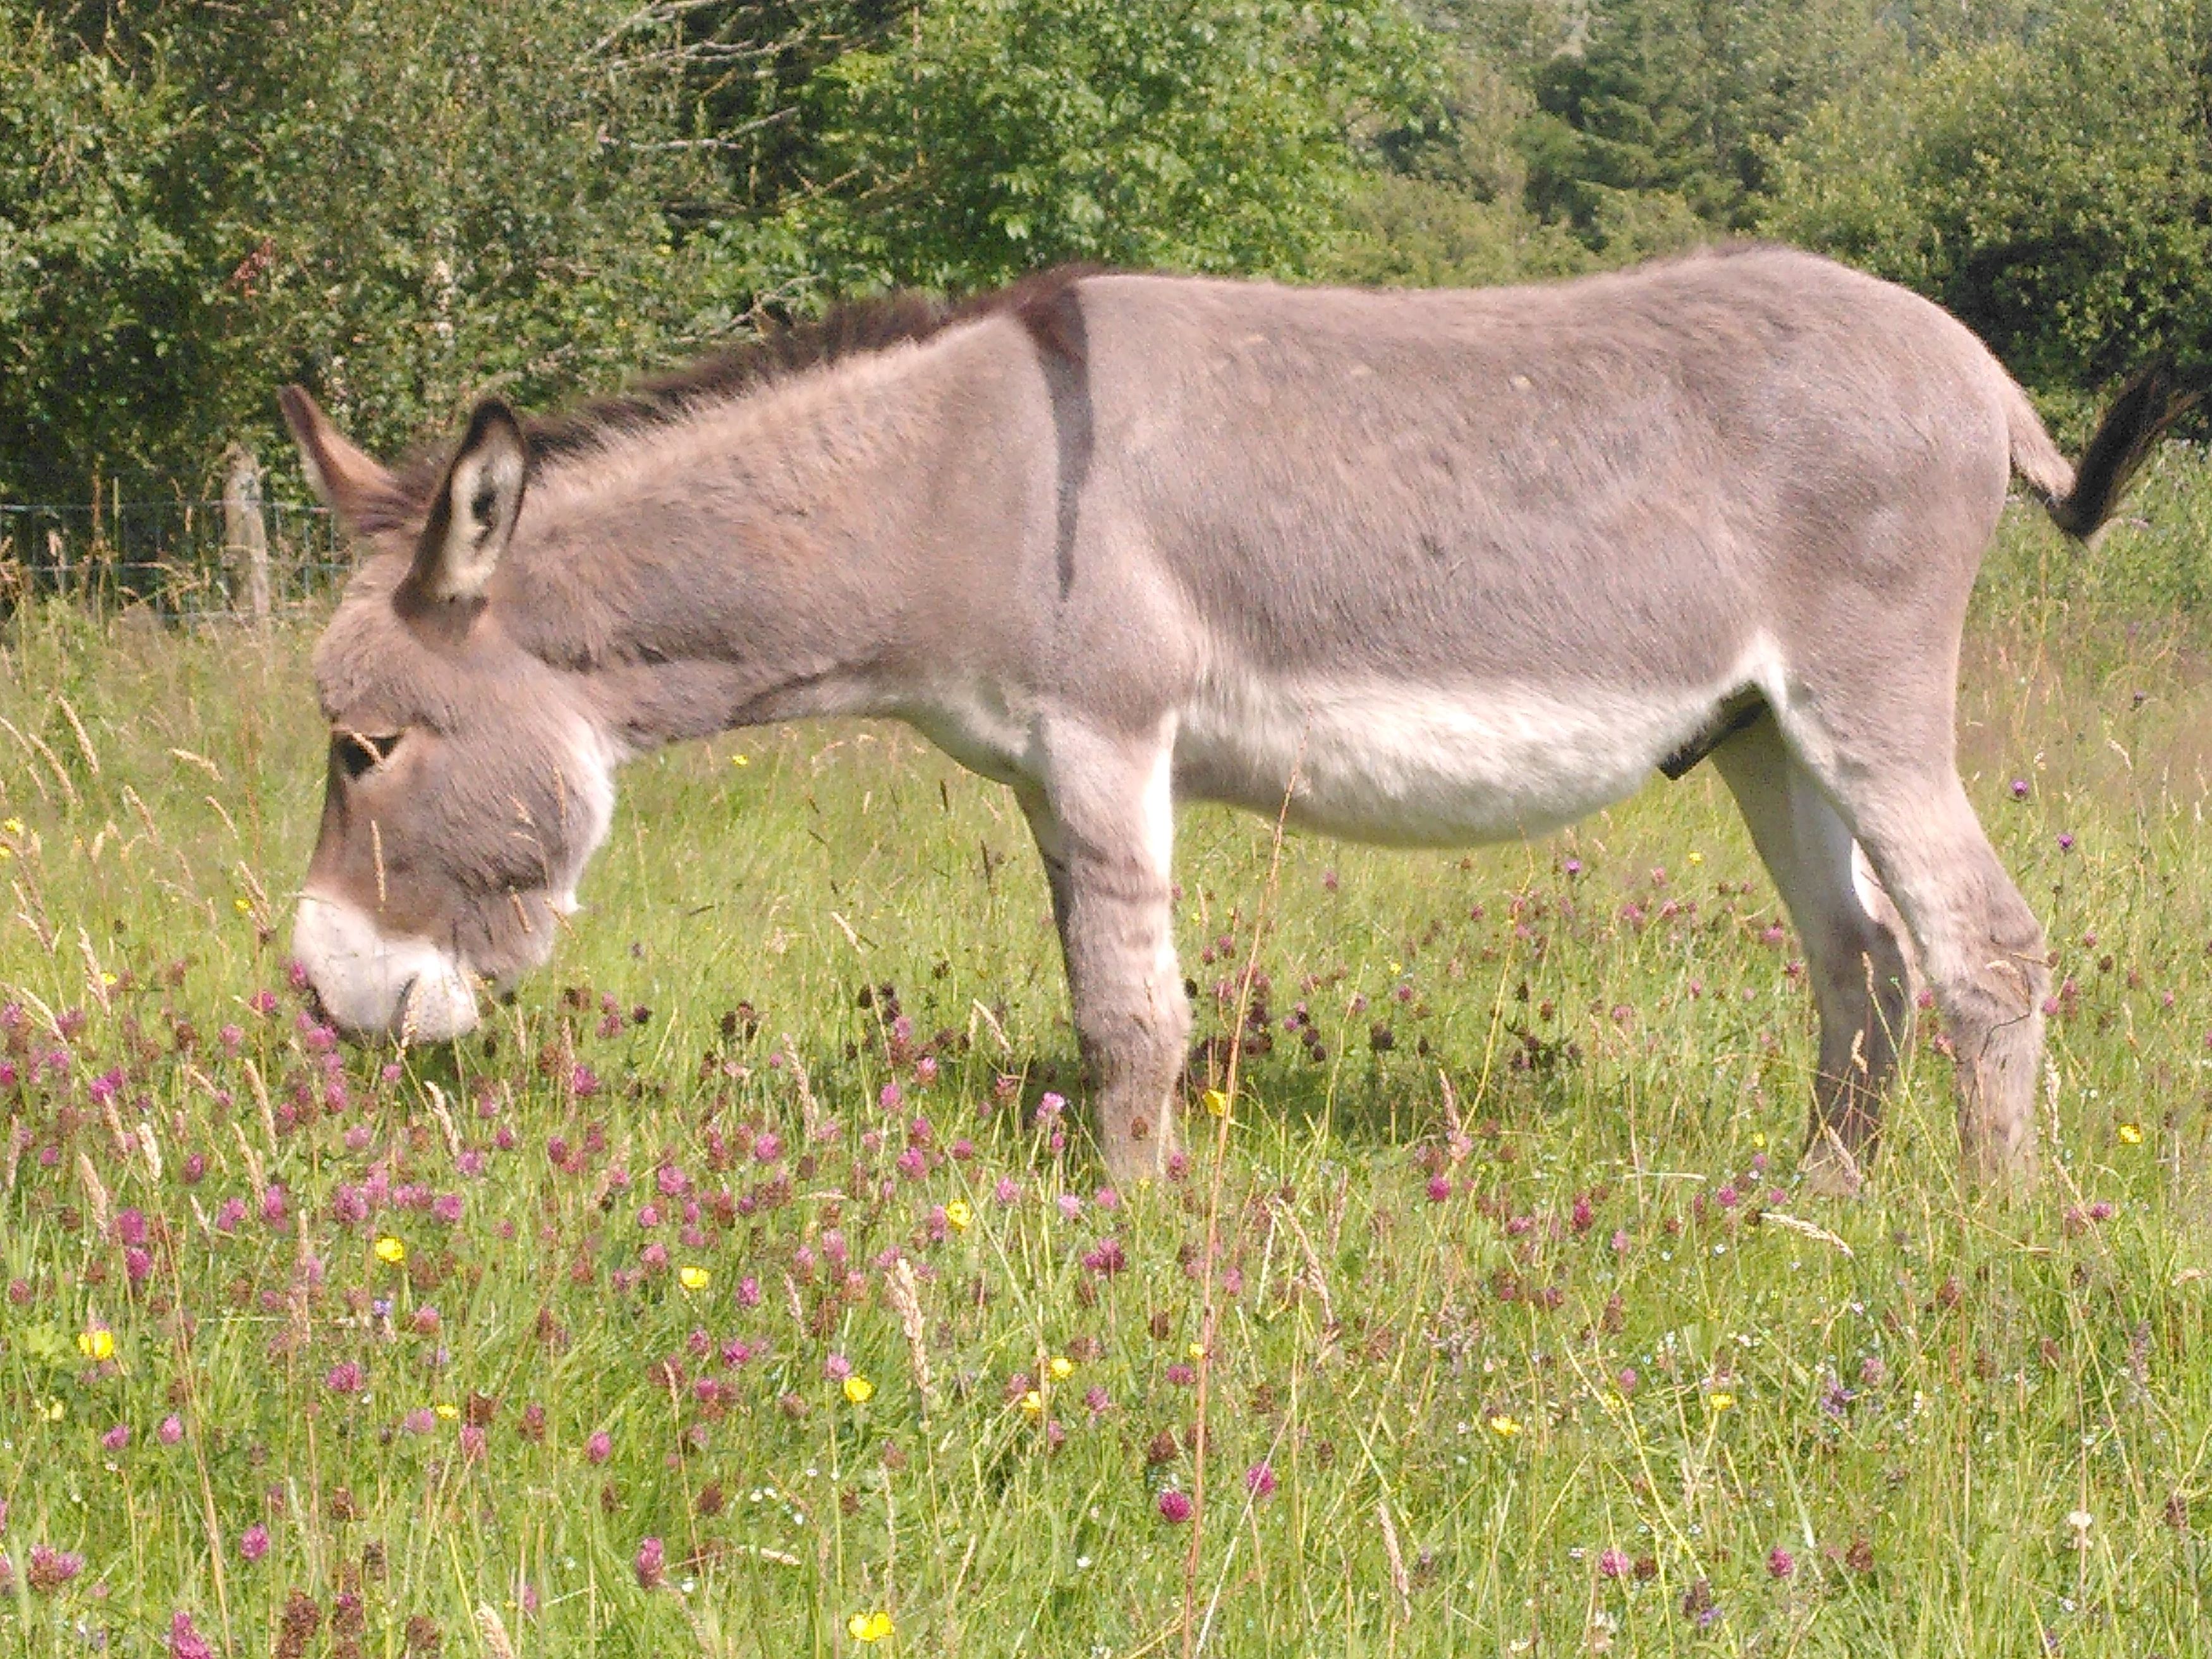 Tommy the donkey eating amongst wild flowers